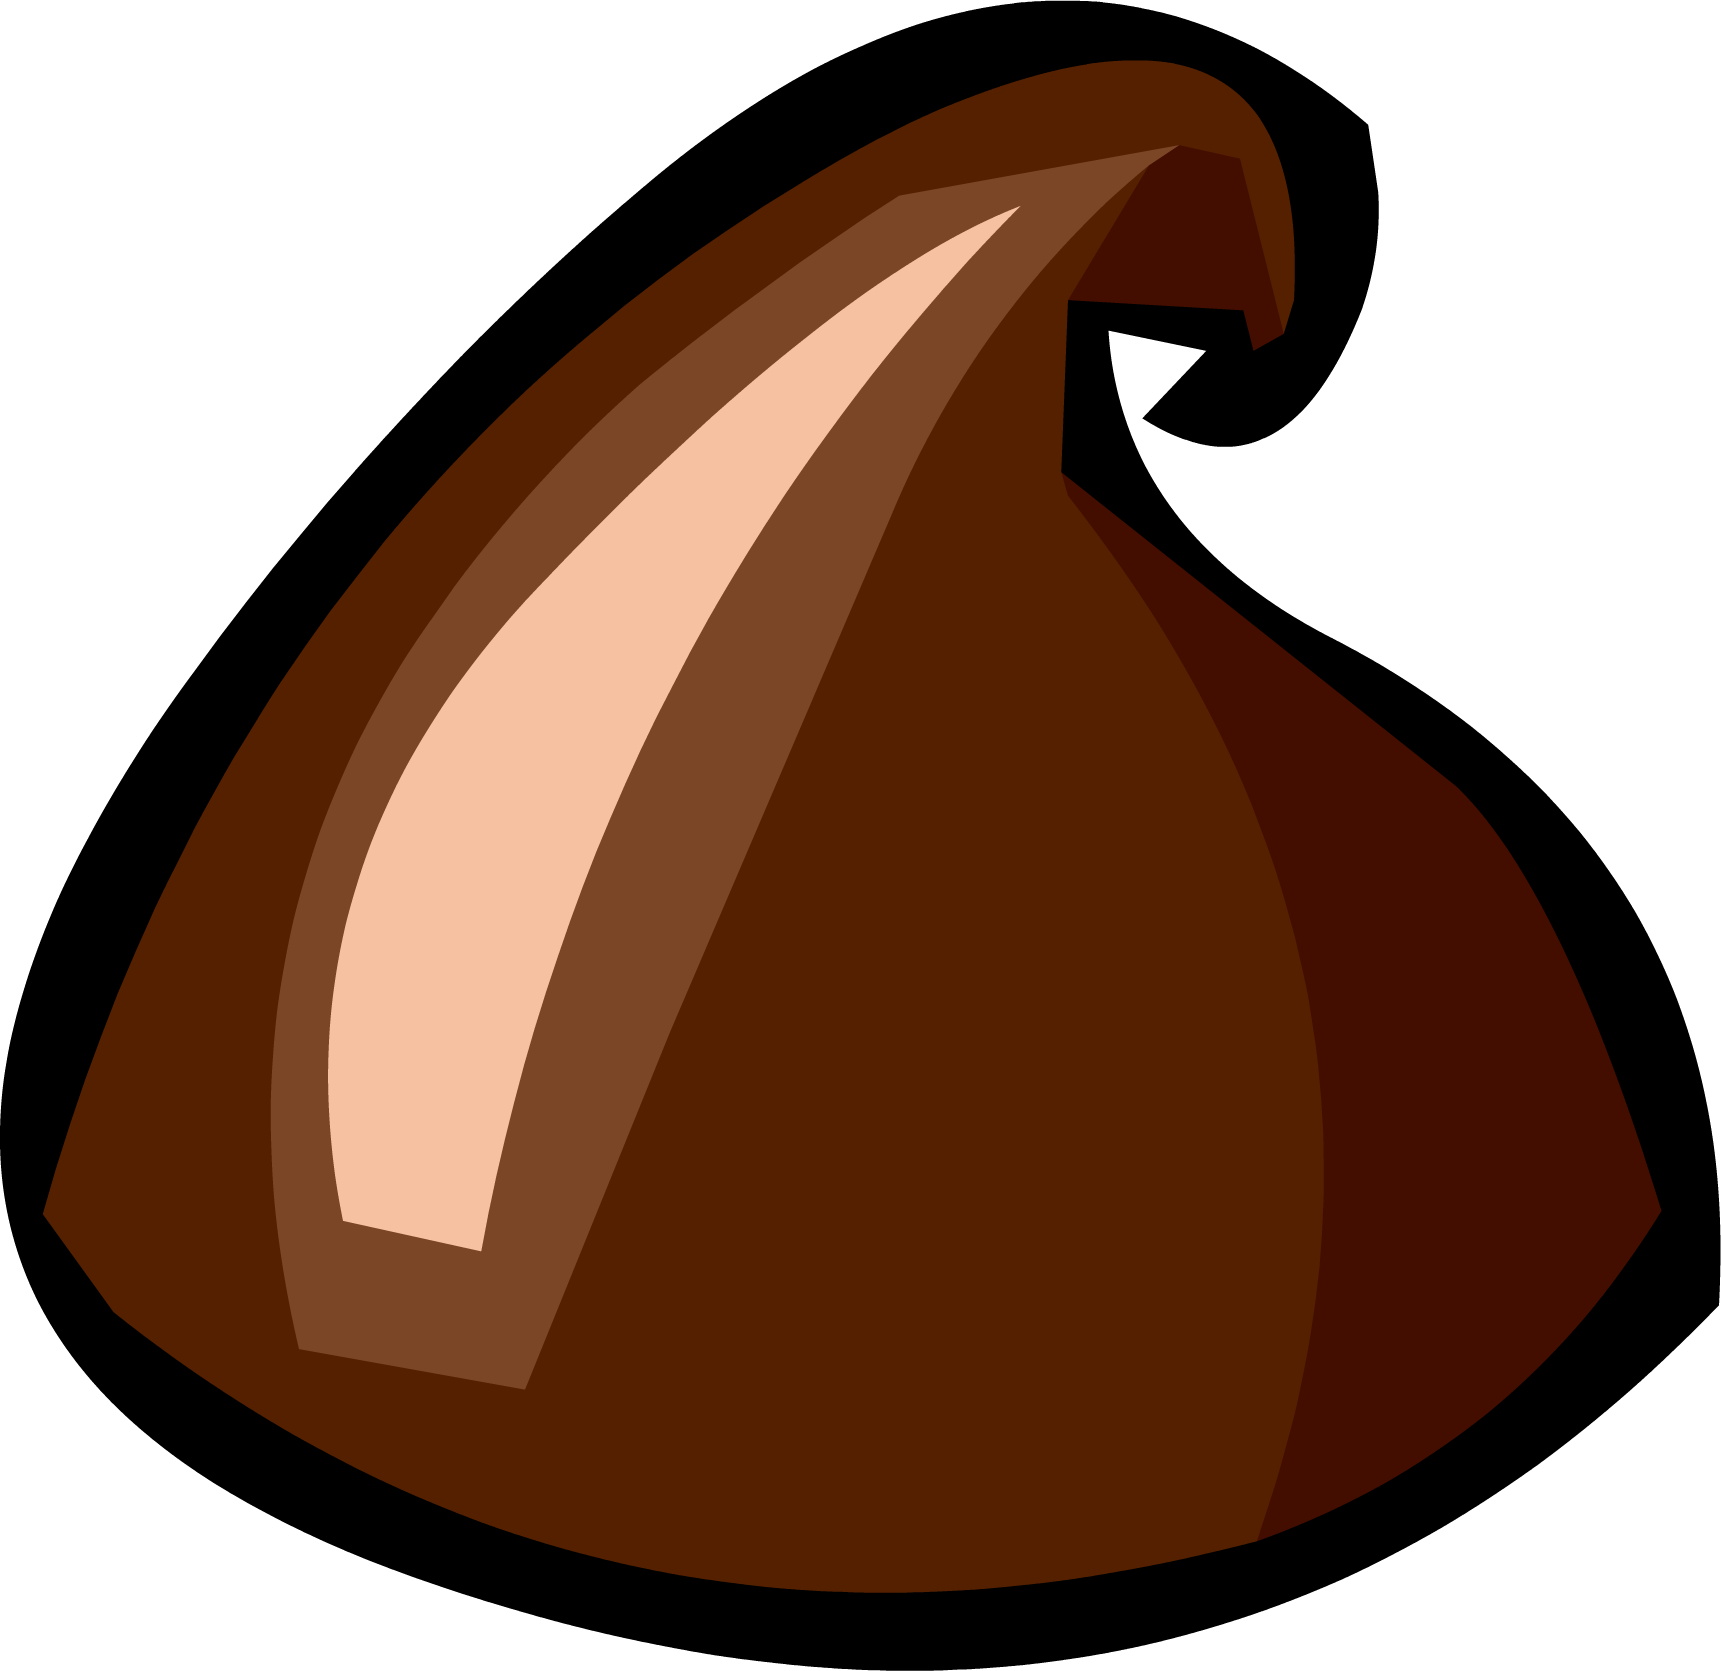 Download Chocolate Chips | Club Penguin Wiki | FANDOM powered by Wikia